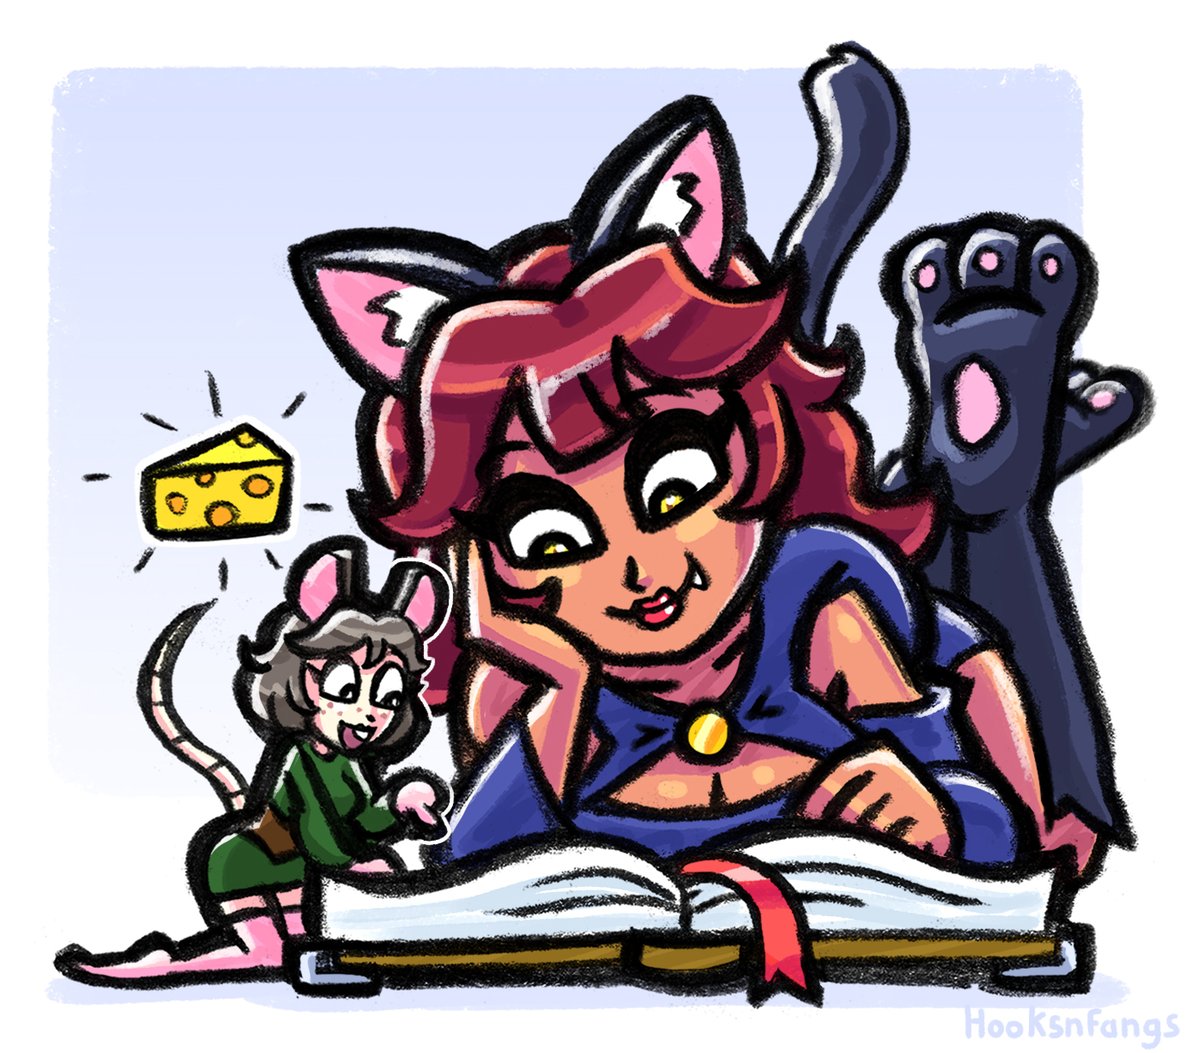 Commission for @pixelatedsweet featuring a cat and mouse enjoying a book! Must be a cheesy book or something.